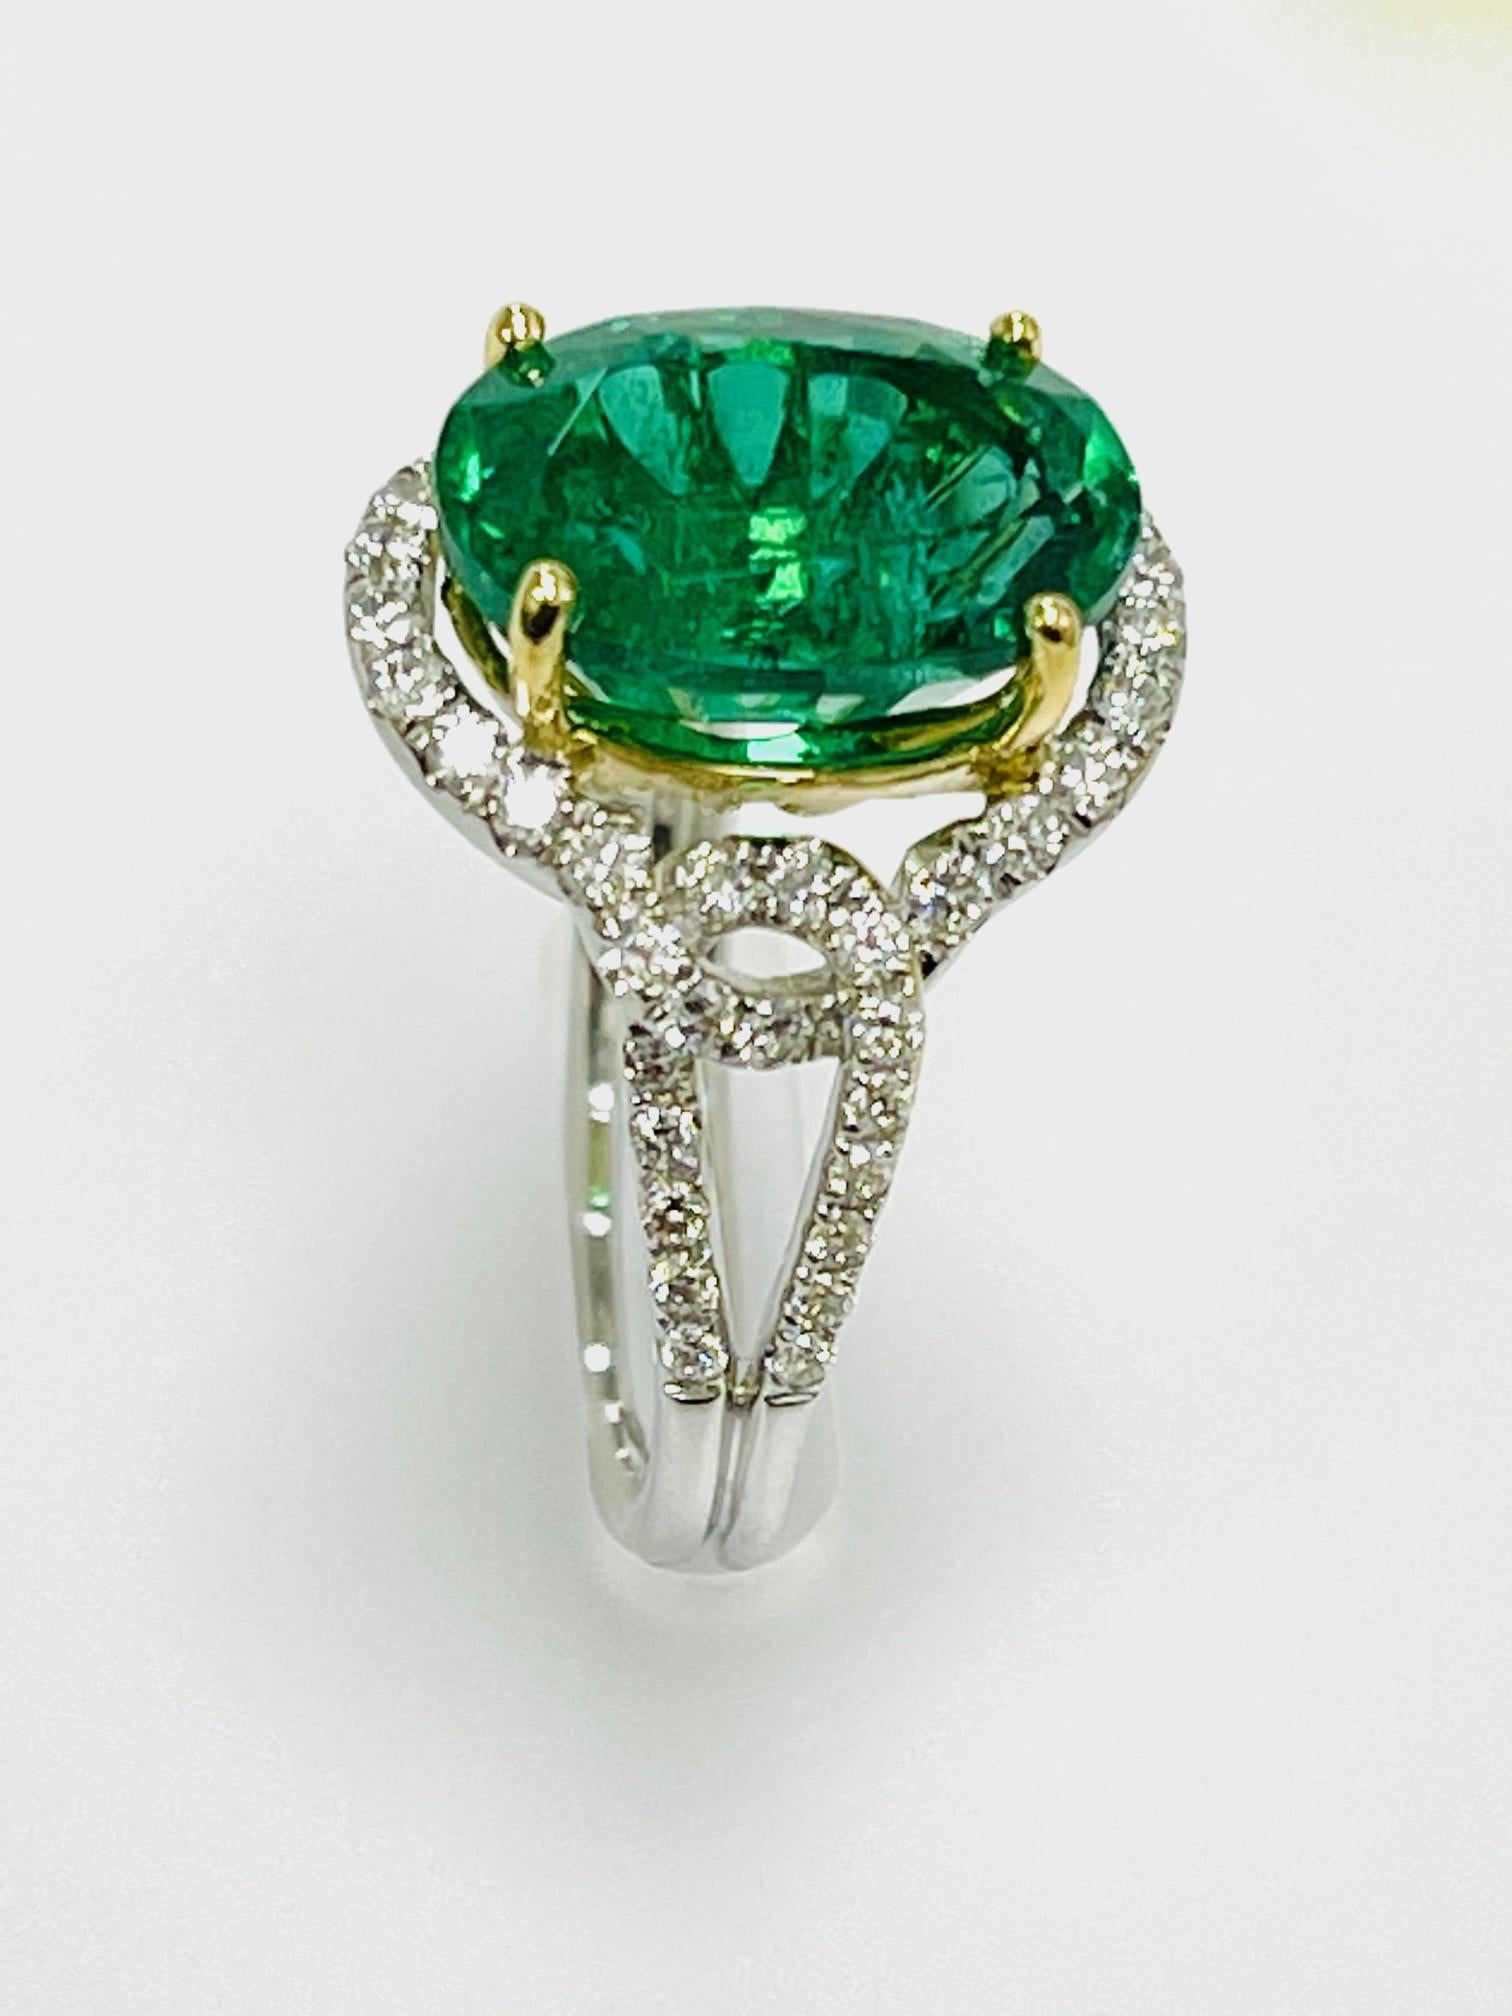 Oval Cut 4.73 Carat Emerald Diamond Cocktail Ring For Sale